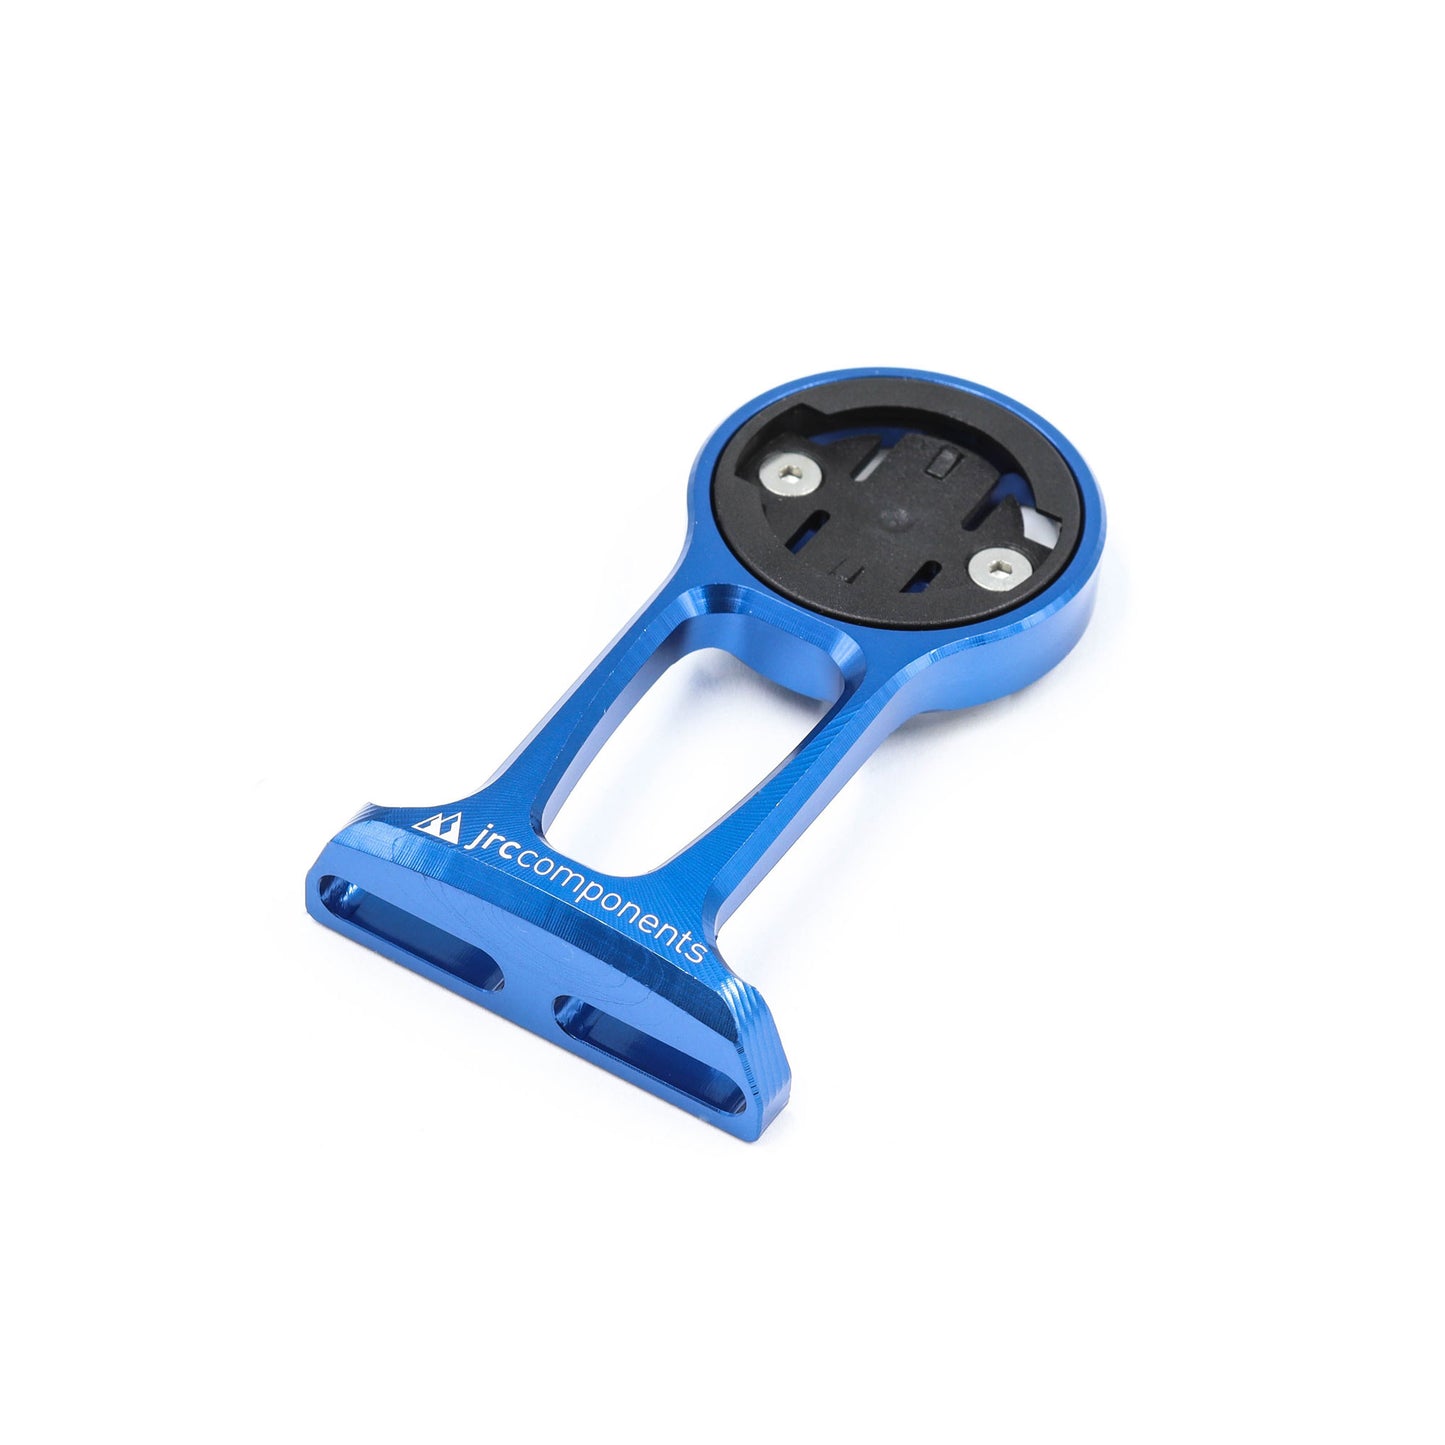 Blue, lightweight aluminium stem out front GPS computer mount for bicycle, compatible with Wahoo